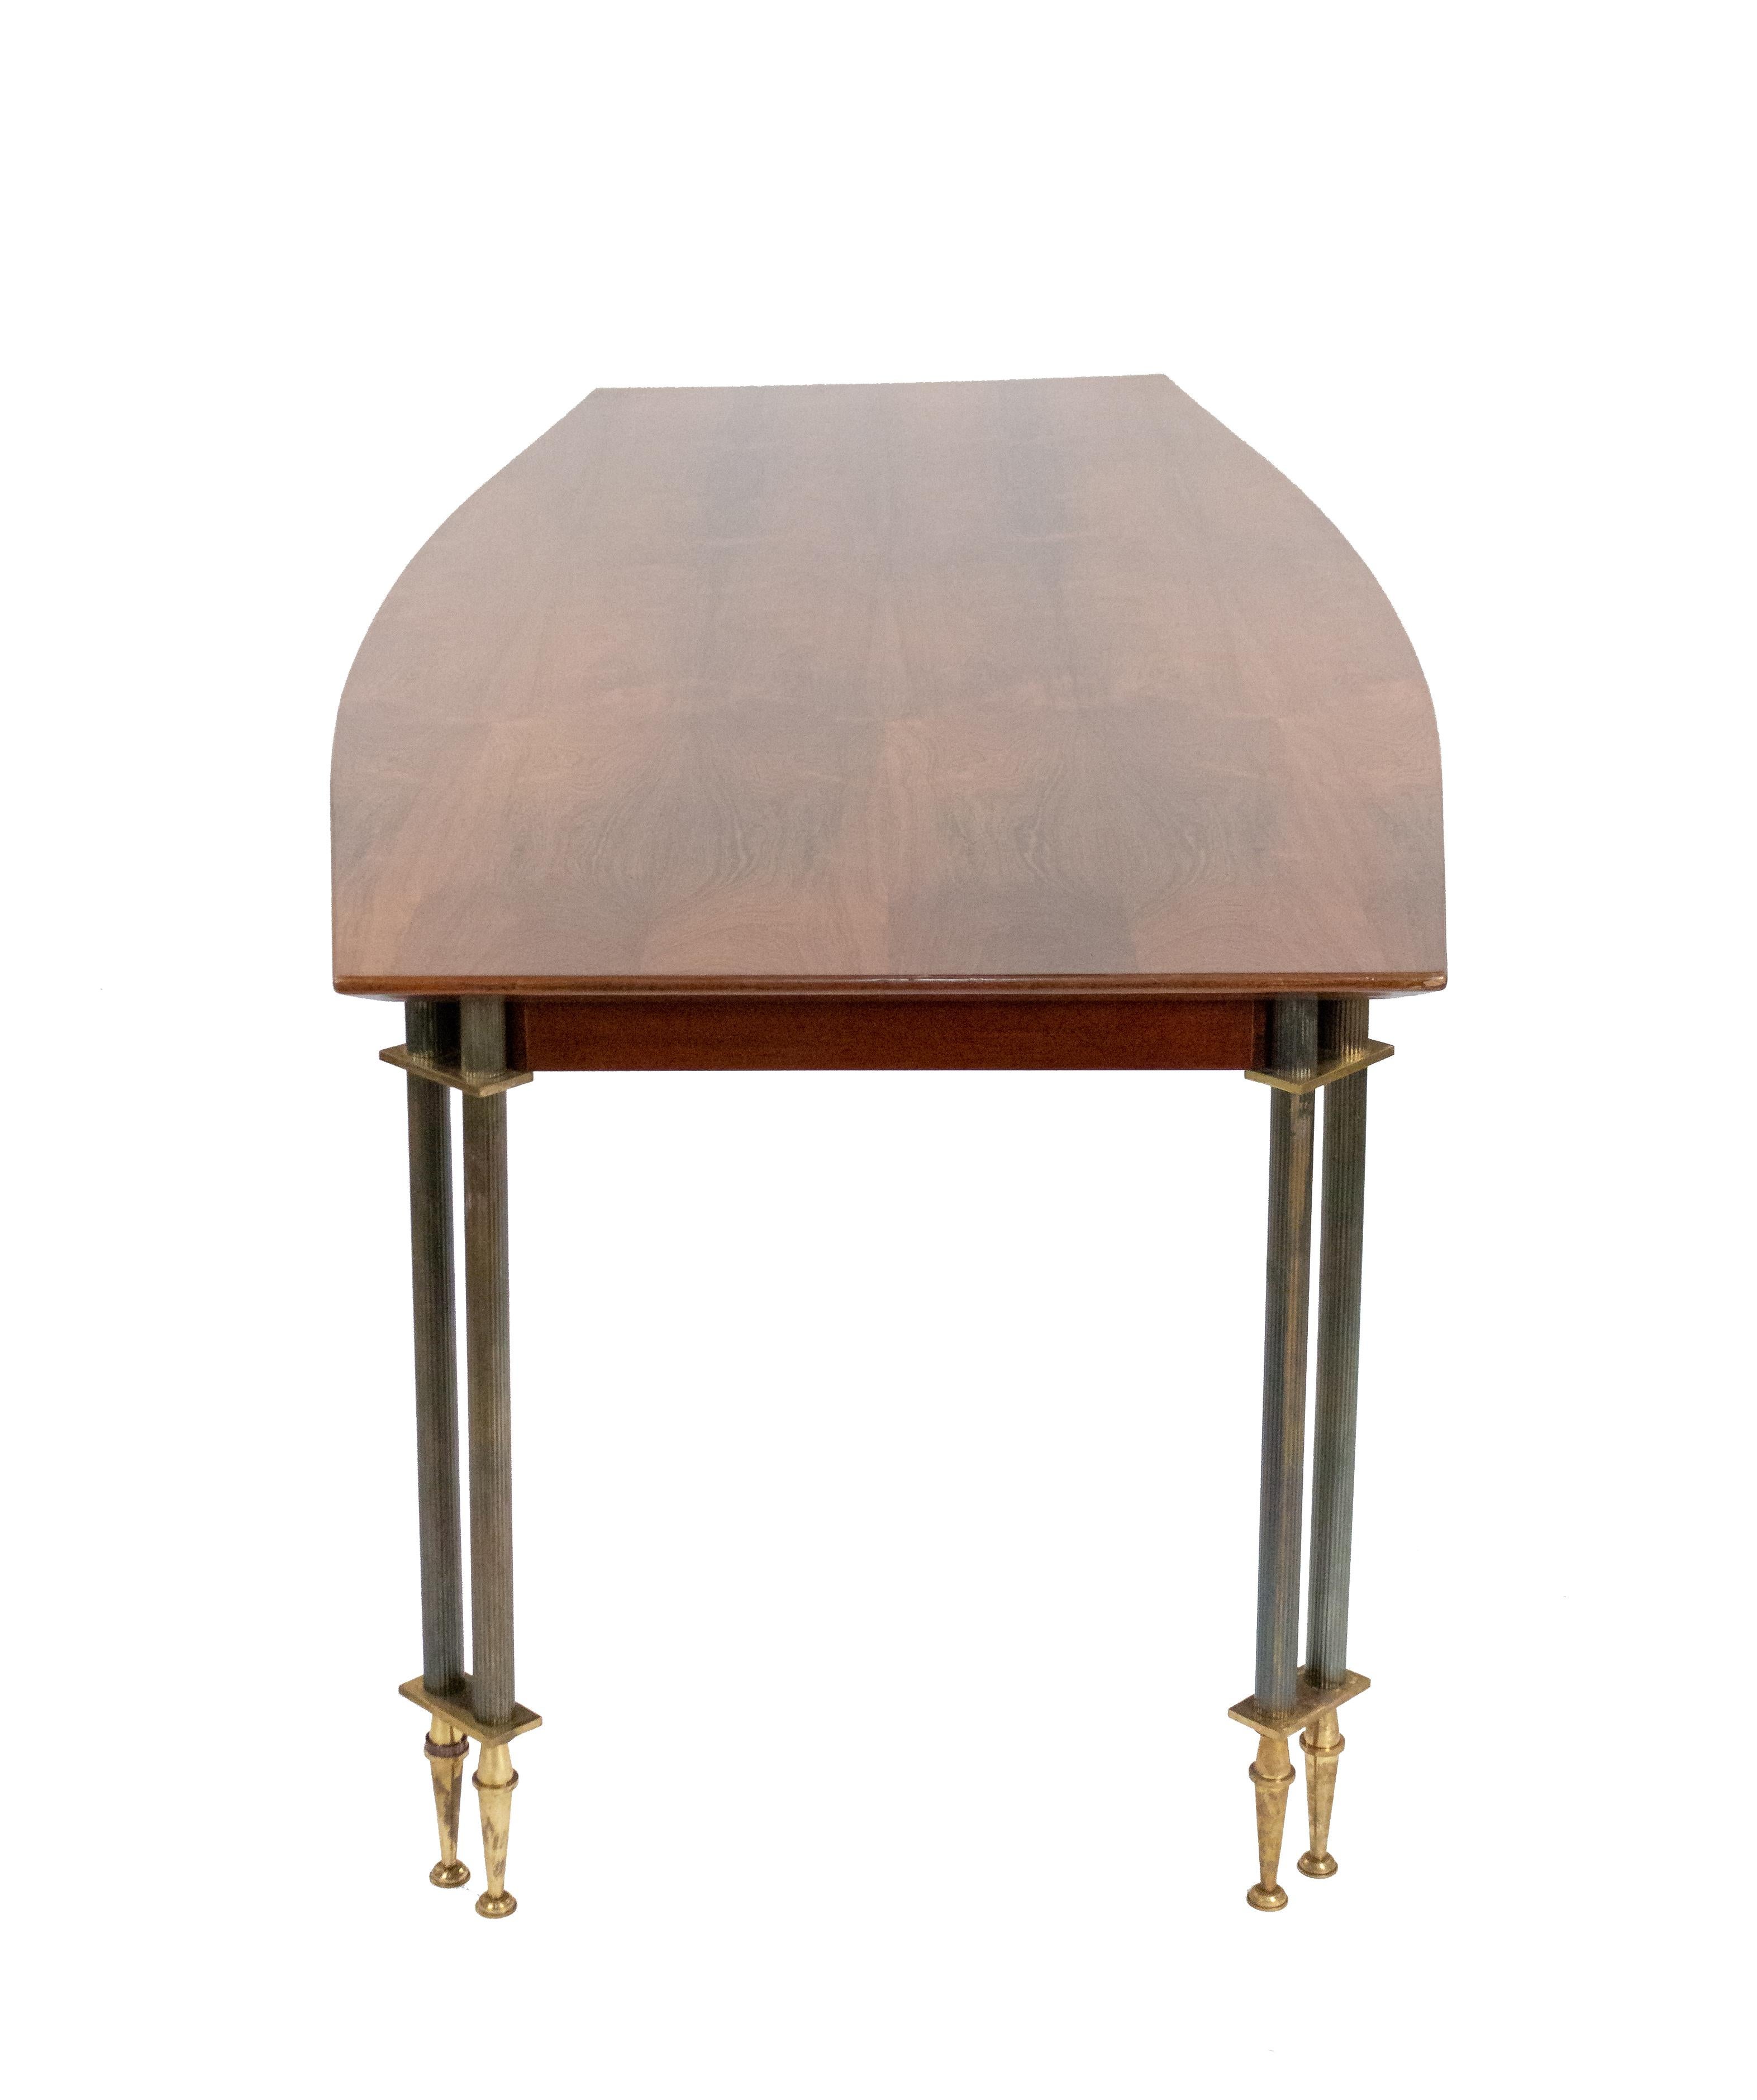 French midcentury rosewood dining table with a gently bowed top and chamfered edge on double fluted bronze legs with gilt sabots (signed: J Leleu; model N4991, 1958).